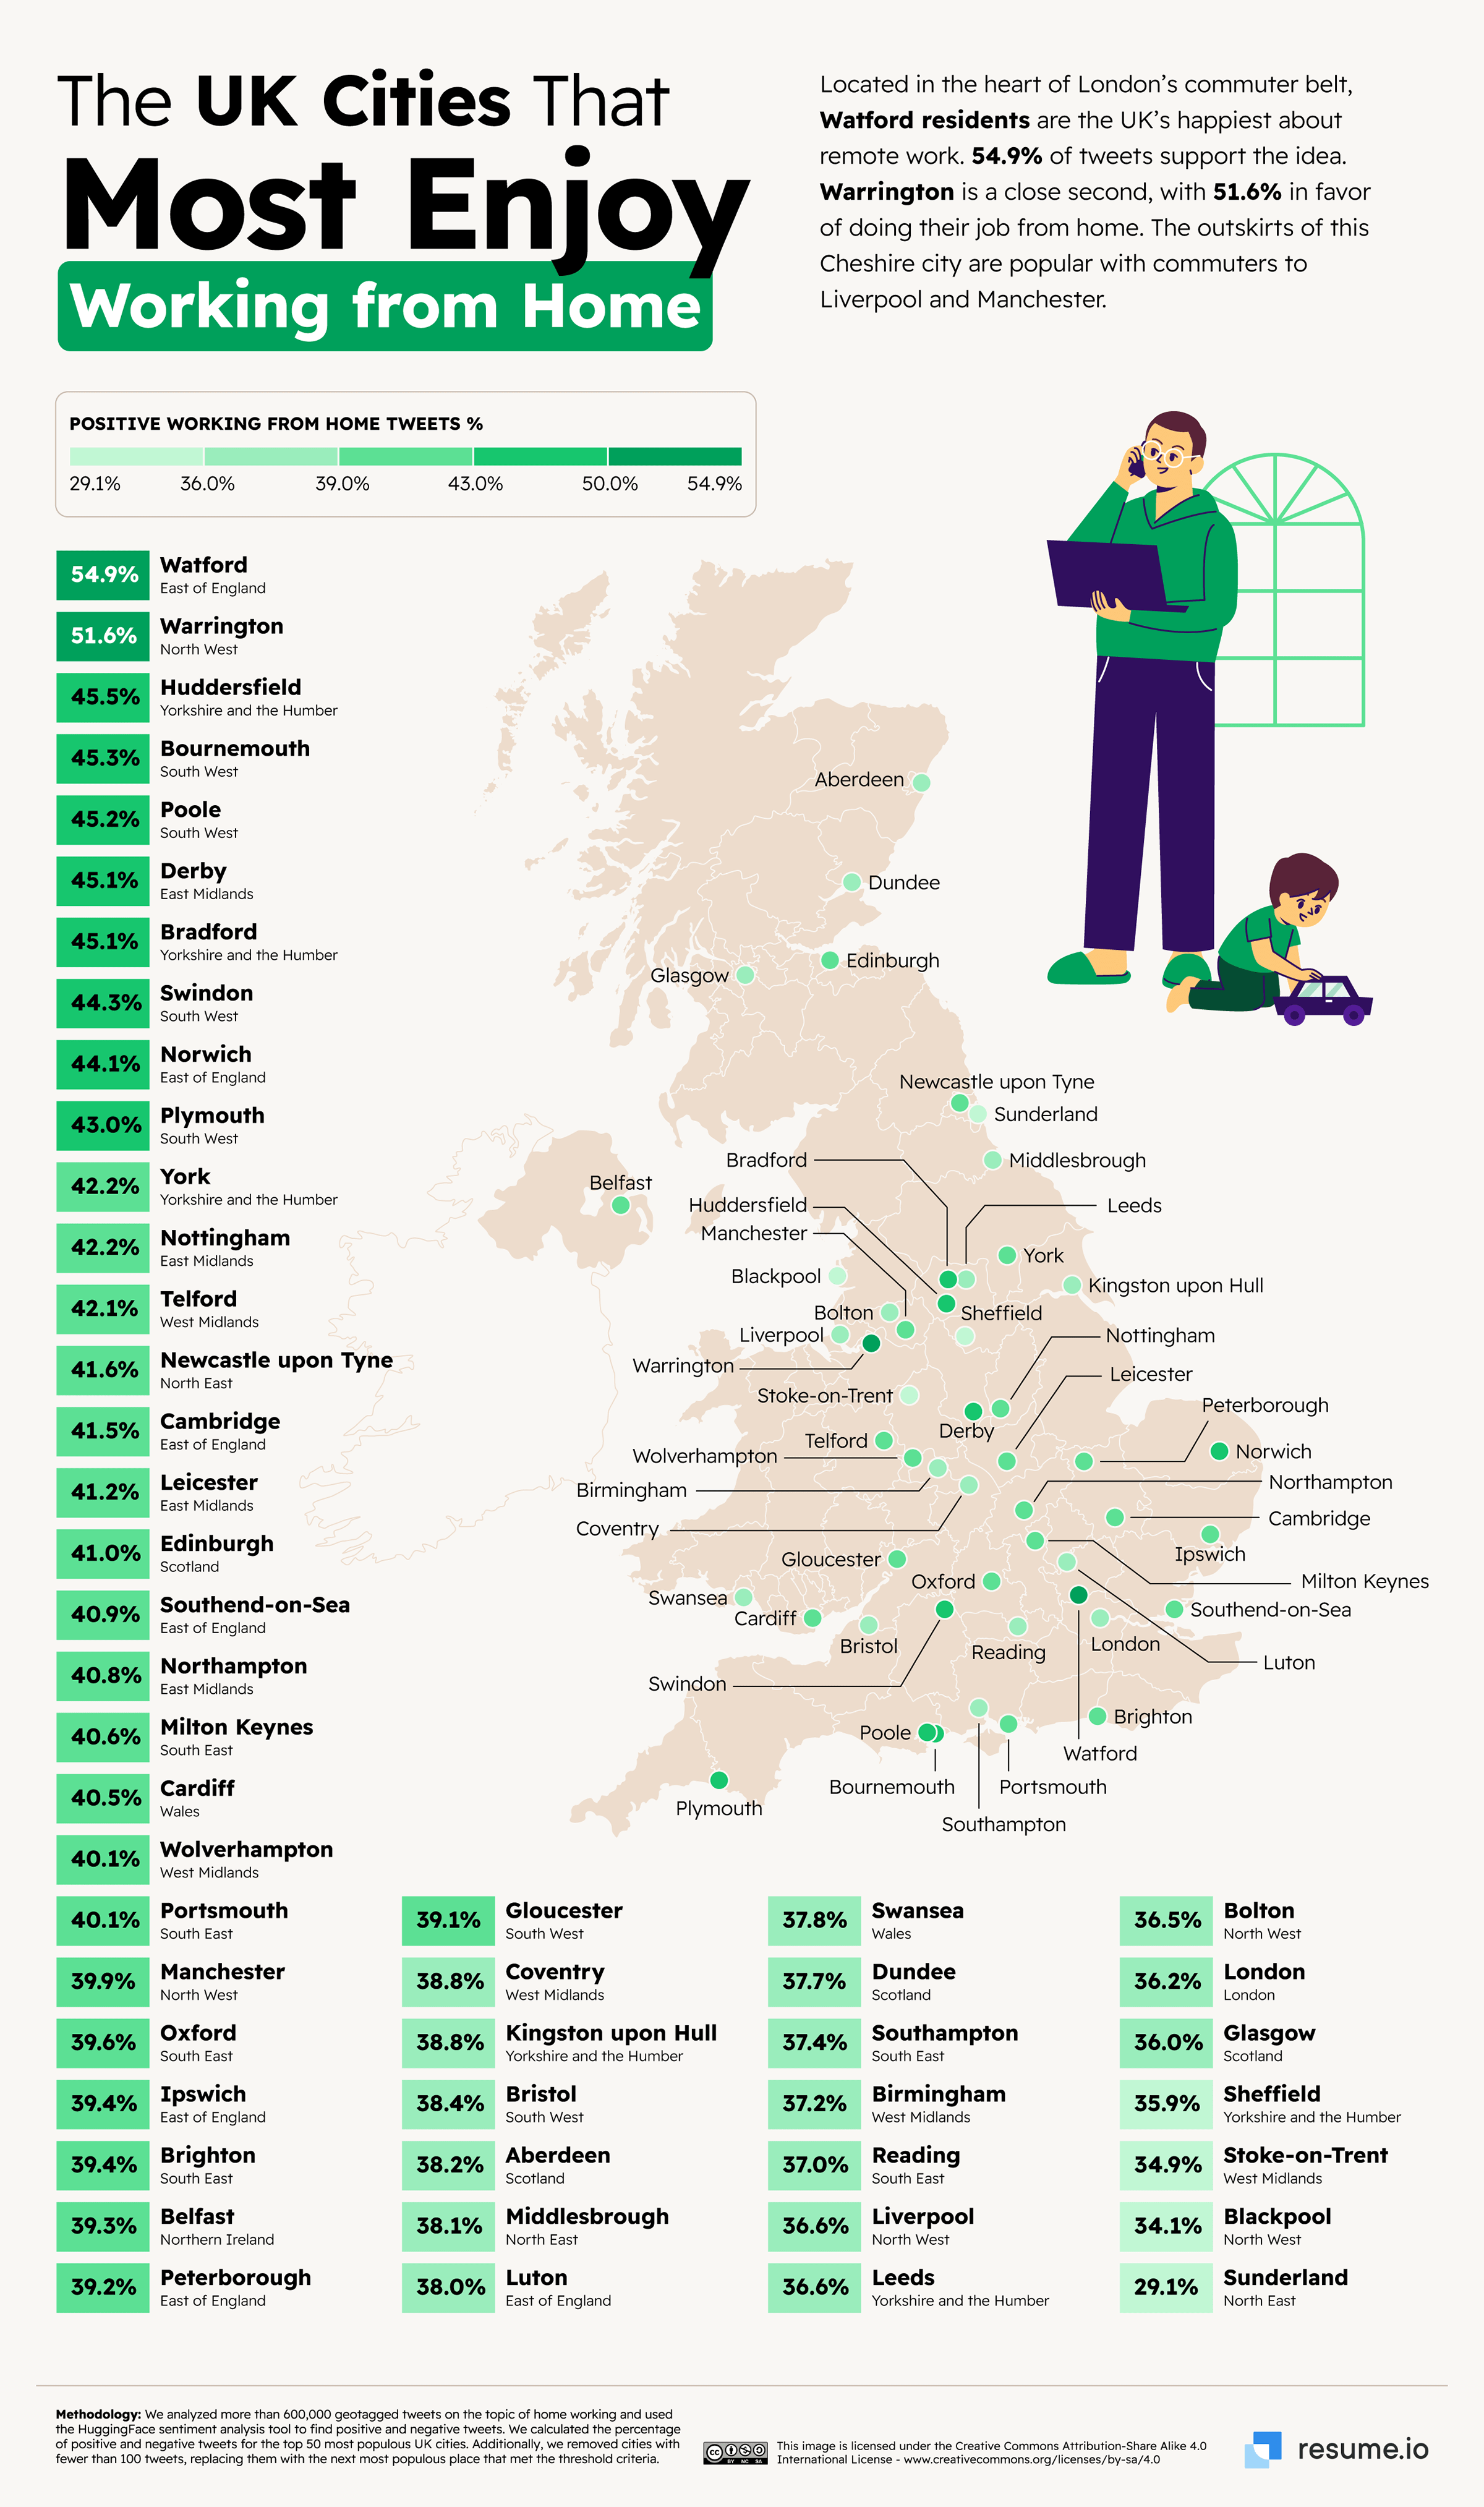 The UK Cities that most enjoy working from home.